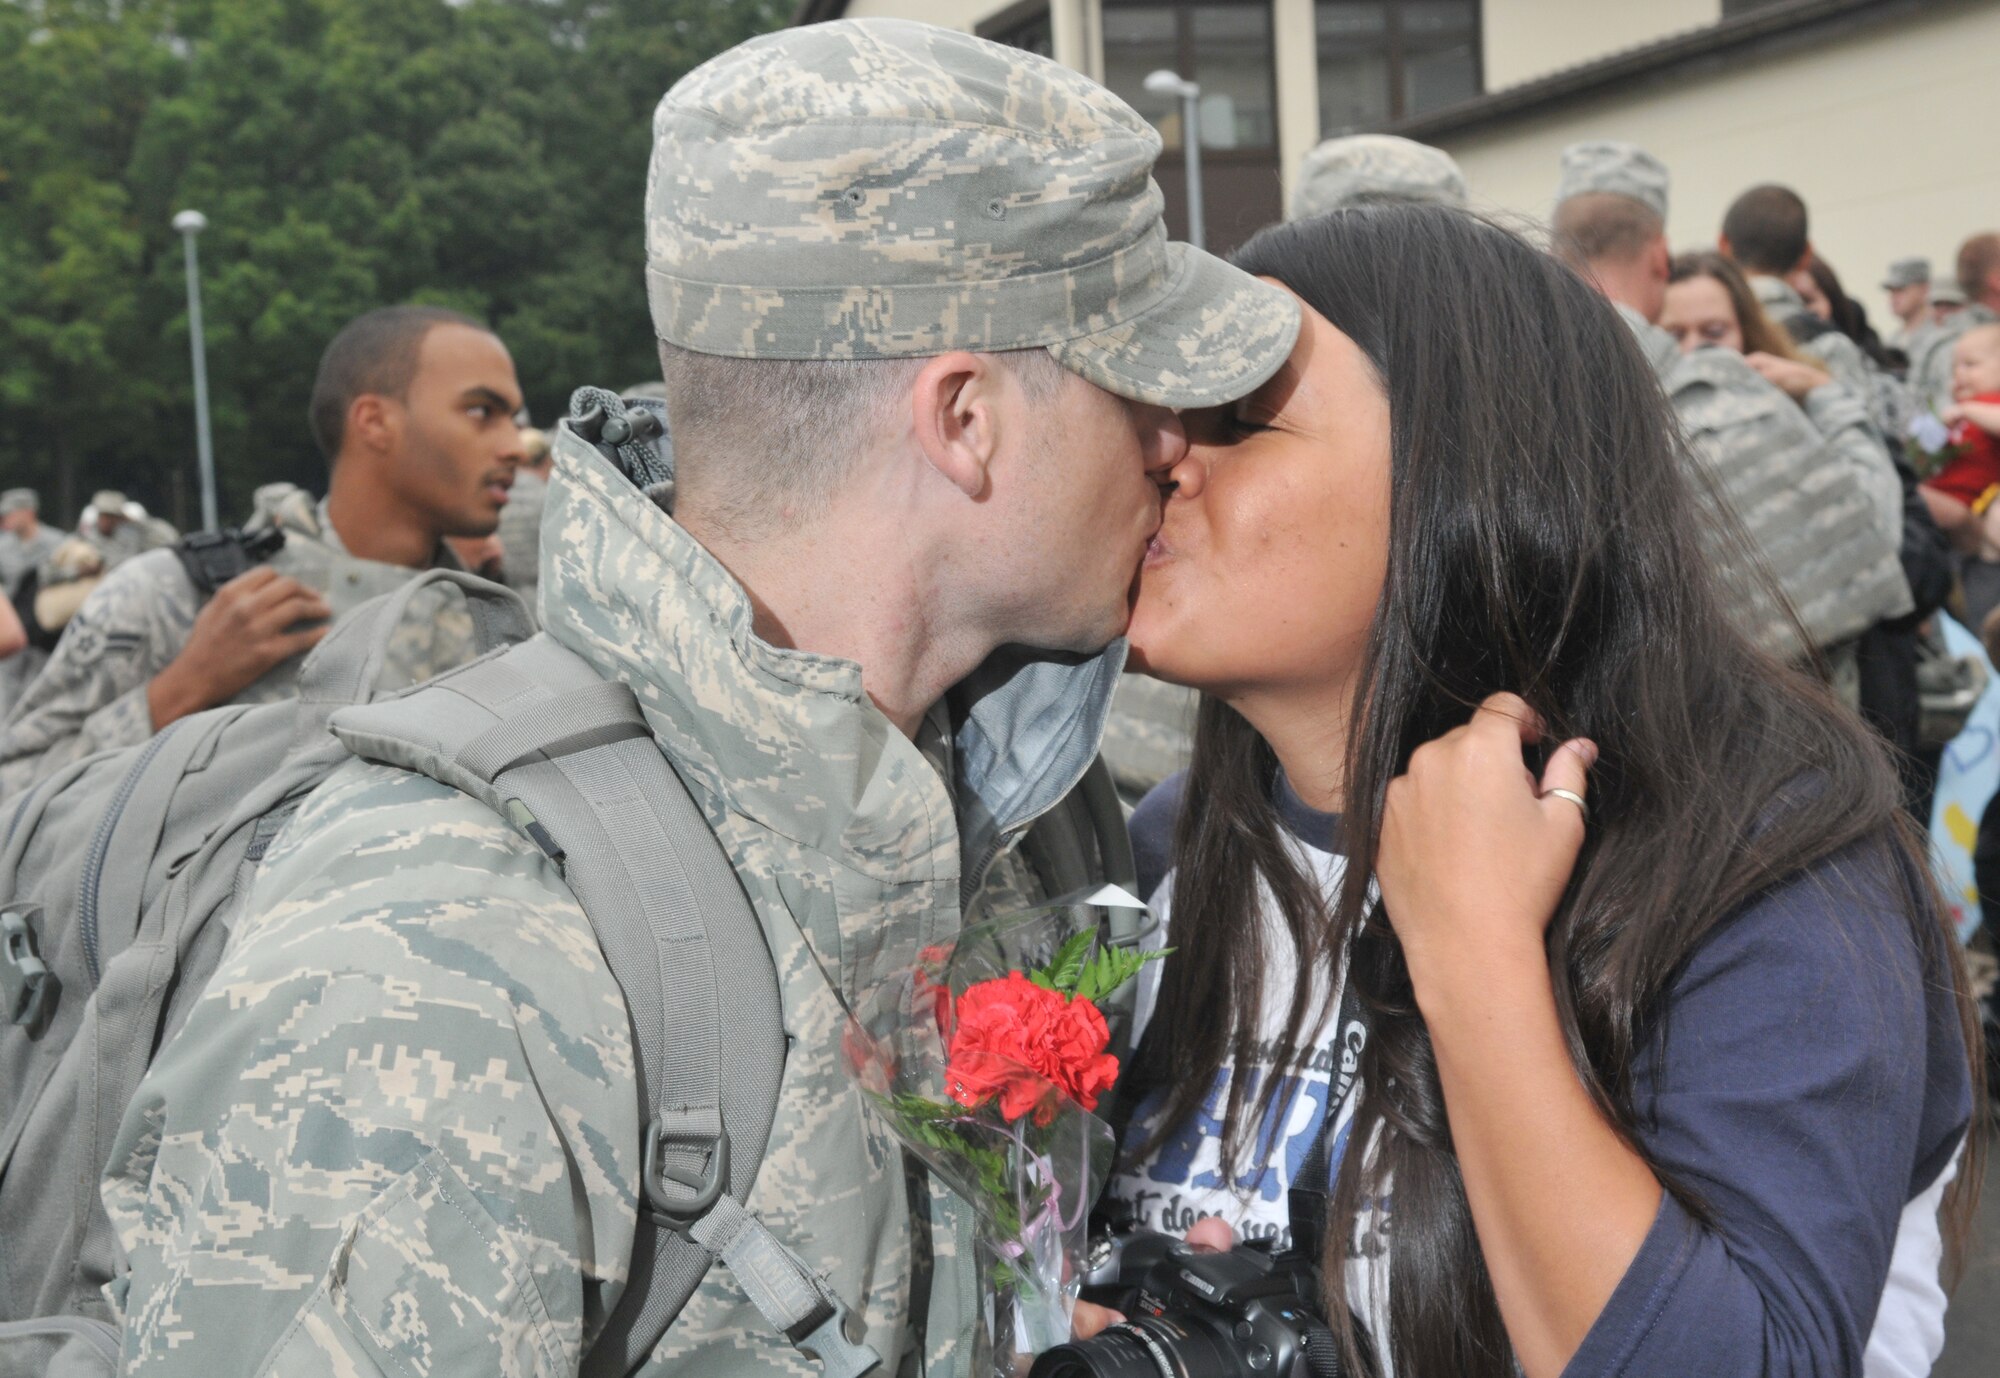 SPANGDAHLEM AIR BASE, Germany – Staff Sgt. Daniel Hawkins, 606th Air Control Squadron, kisses his wife Jessica after returning from a four-month deployment to Kandahar, Afghanistan, Sept. 16.  About 60 members of the 606th ACS operated radar and communication for command and control for the 71st Expeditionary Air Control Squadron.  The unit also deployed 300 short tons of equipment to support air battle management operations and more than 13,000 sorties.  Approximately 30 other 606th ACS members also returned from a four-month deployment to southwest Asia in support of the 73rd EACS.  (U.S. Air Force photo/Airman 1st Class Nick Wilson)